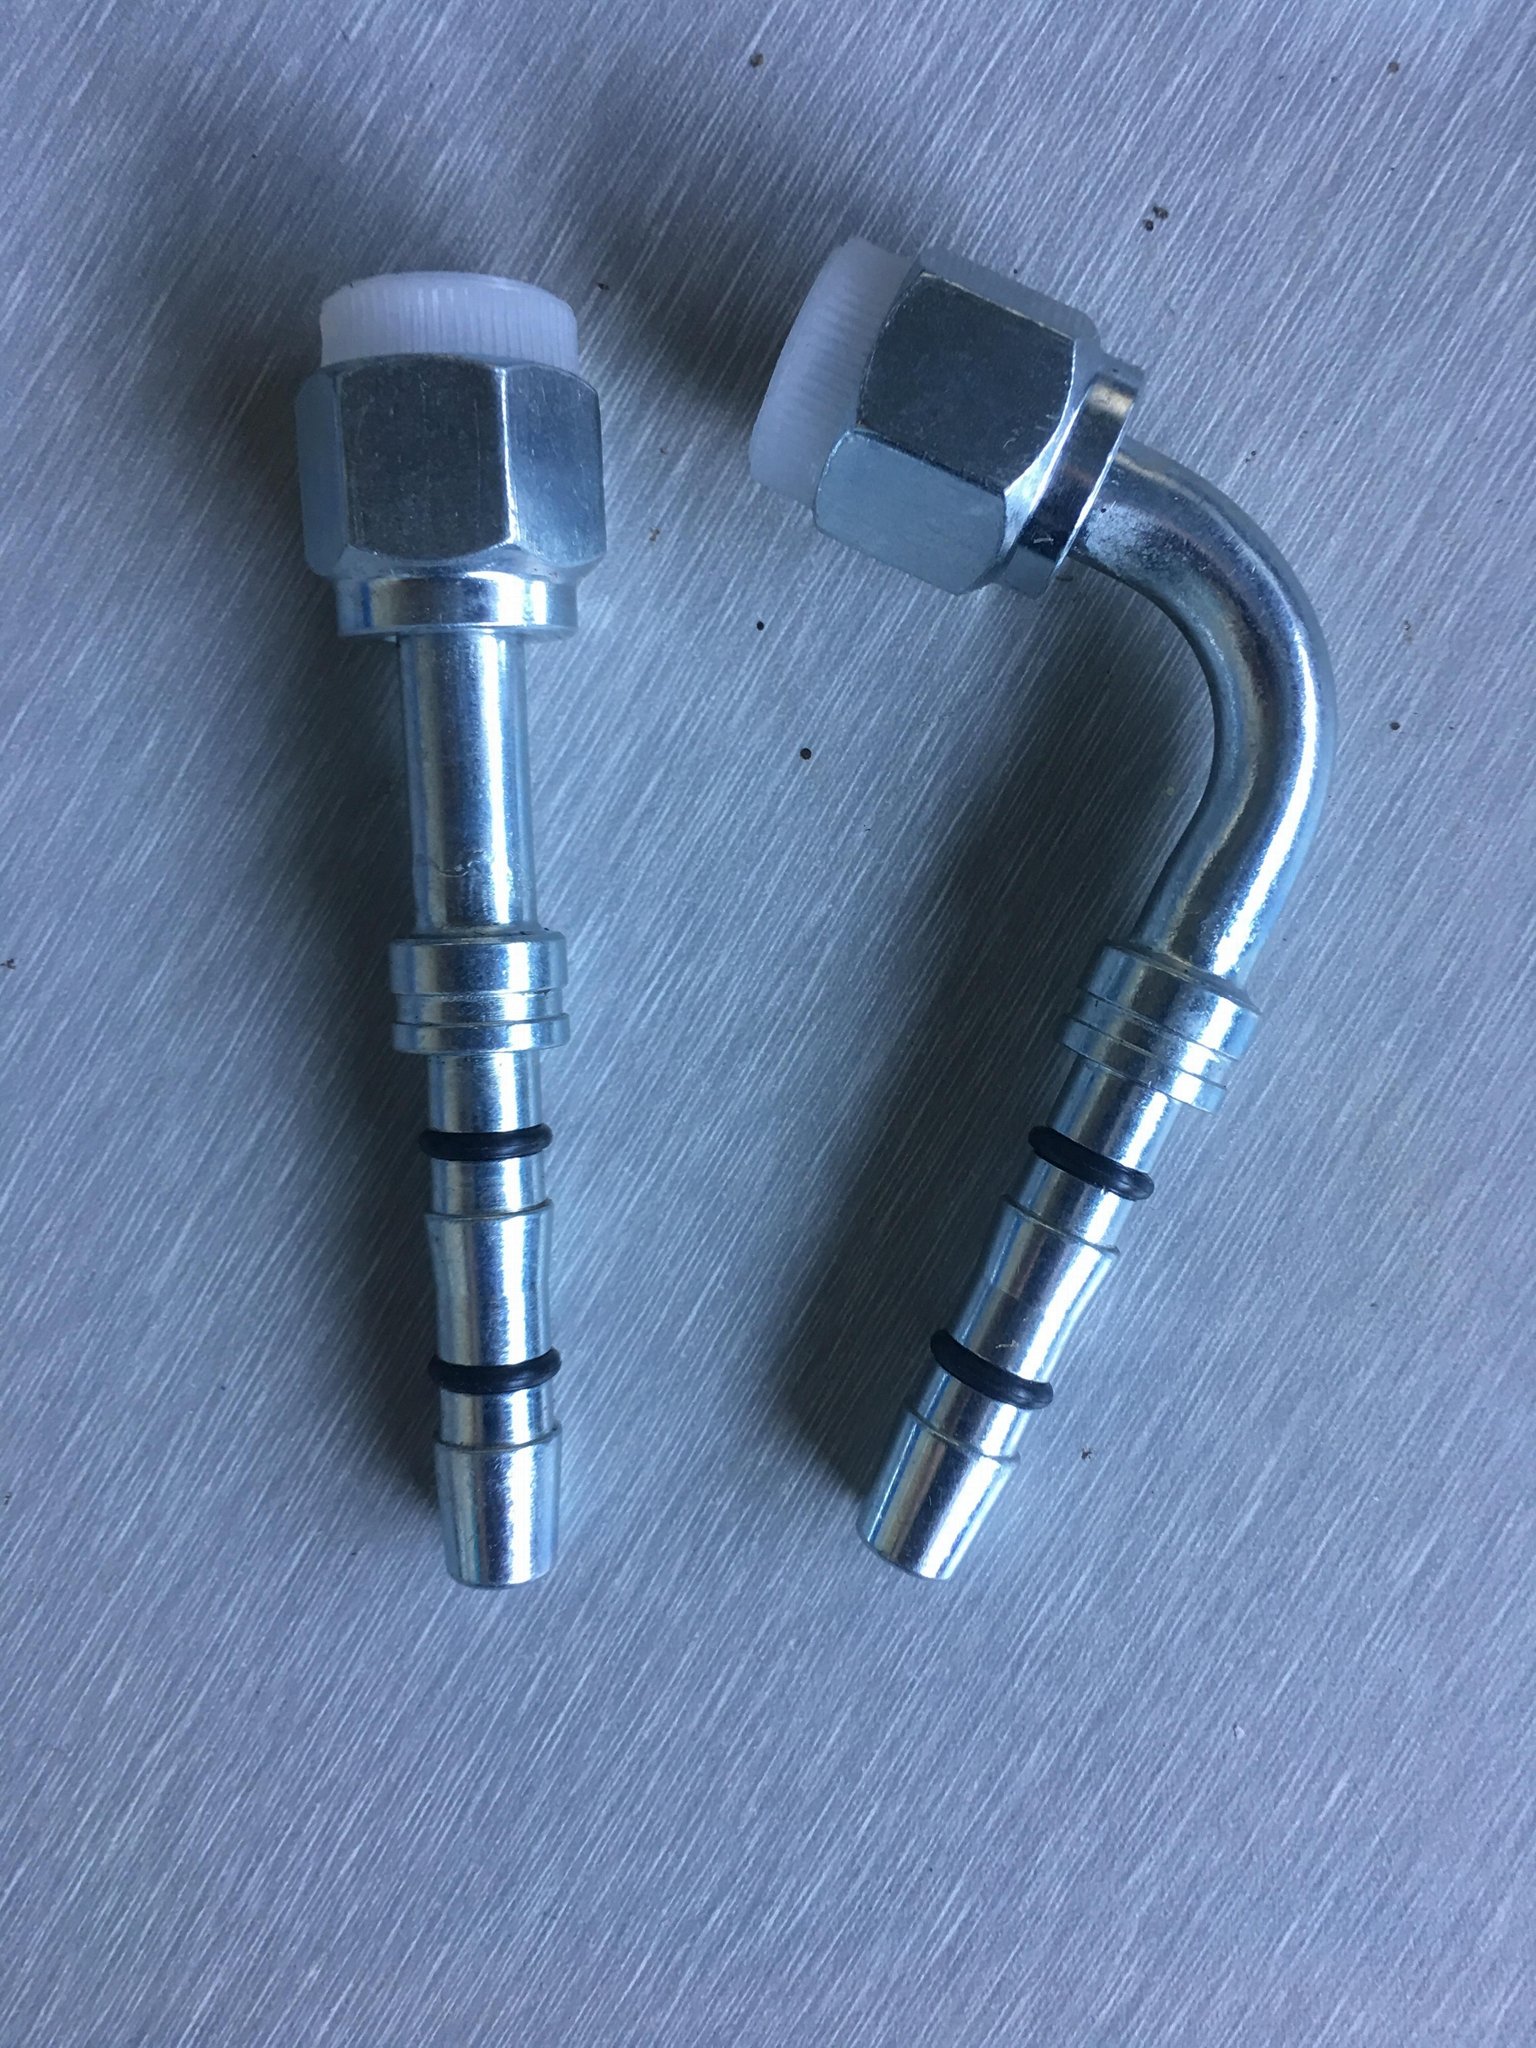 OEM Carrier Refrigeration Hose fittings R404a Refrigerator Hose fittings 3